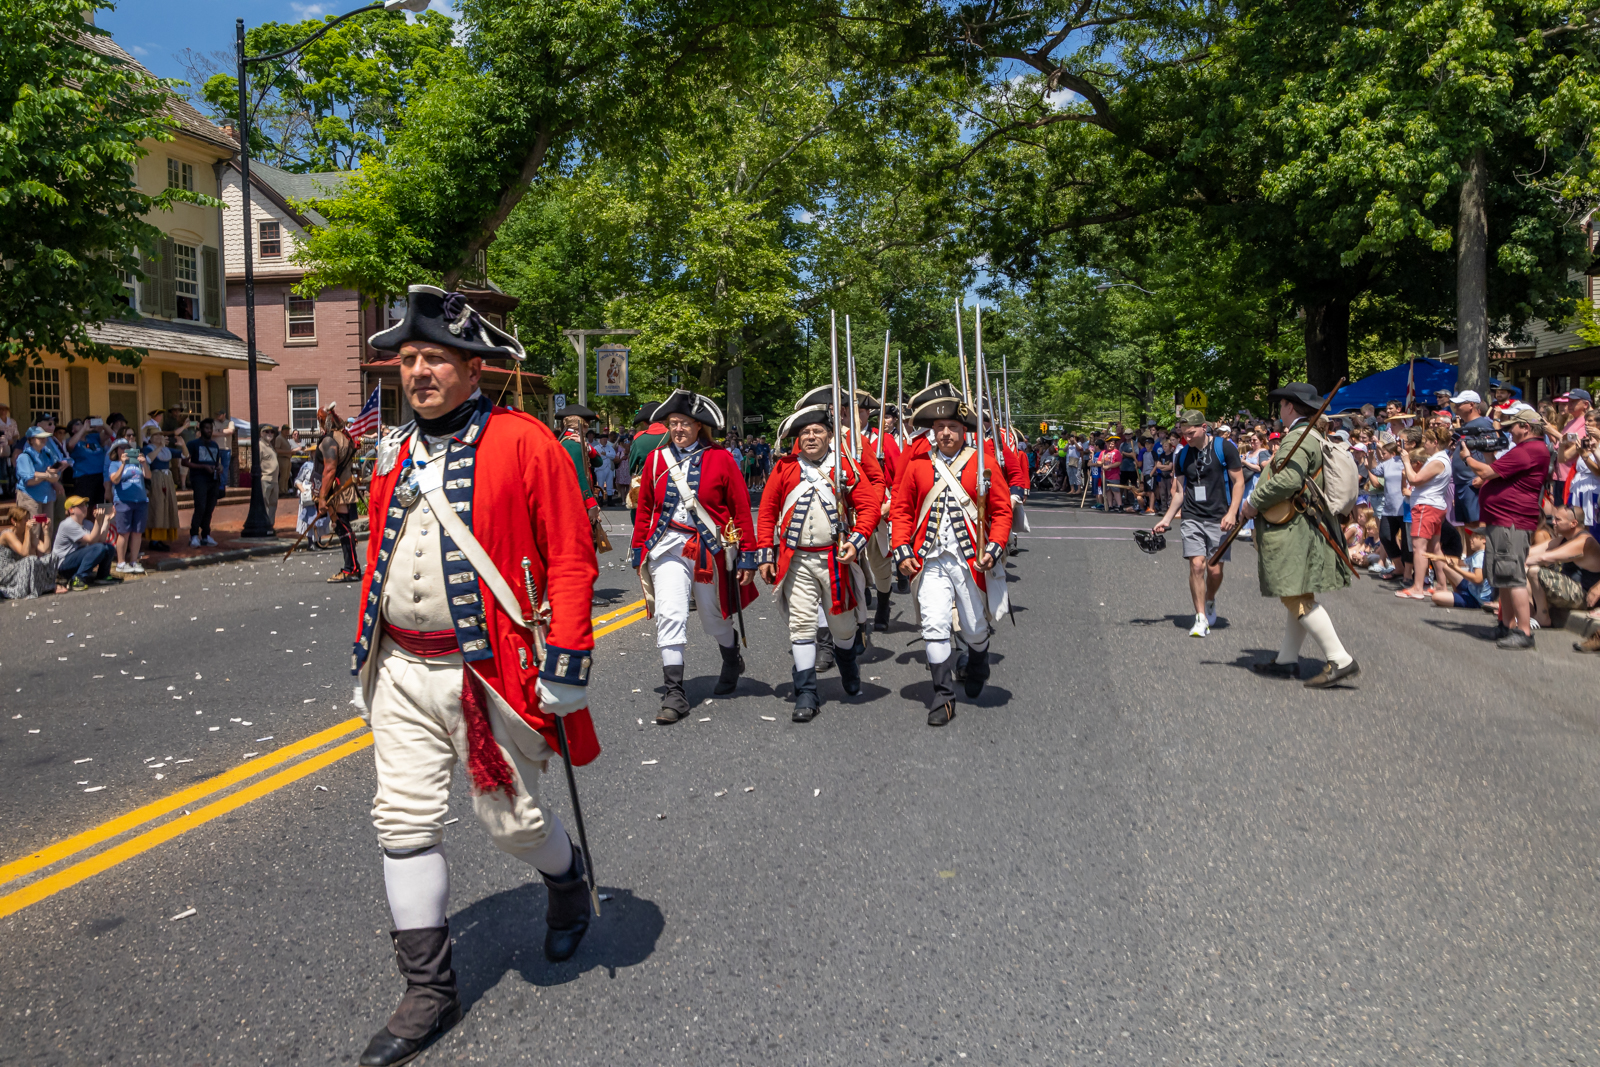 Red Coats Marching in a Line